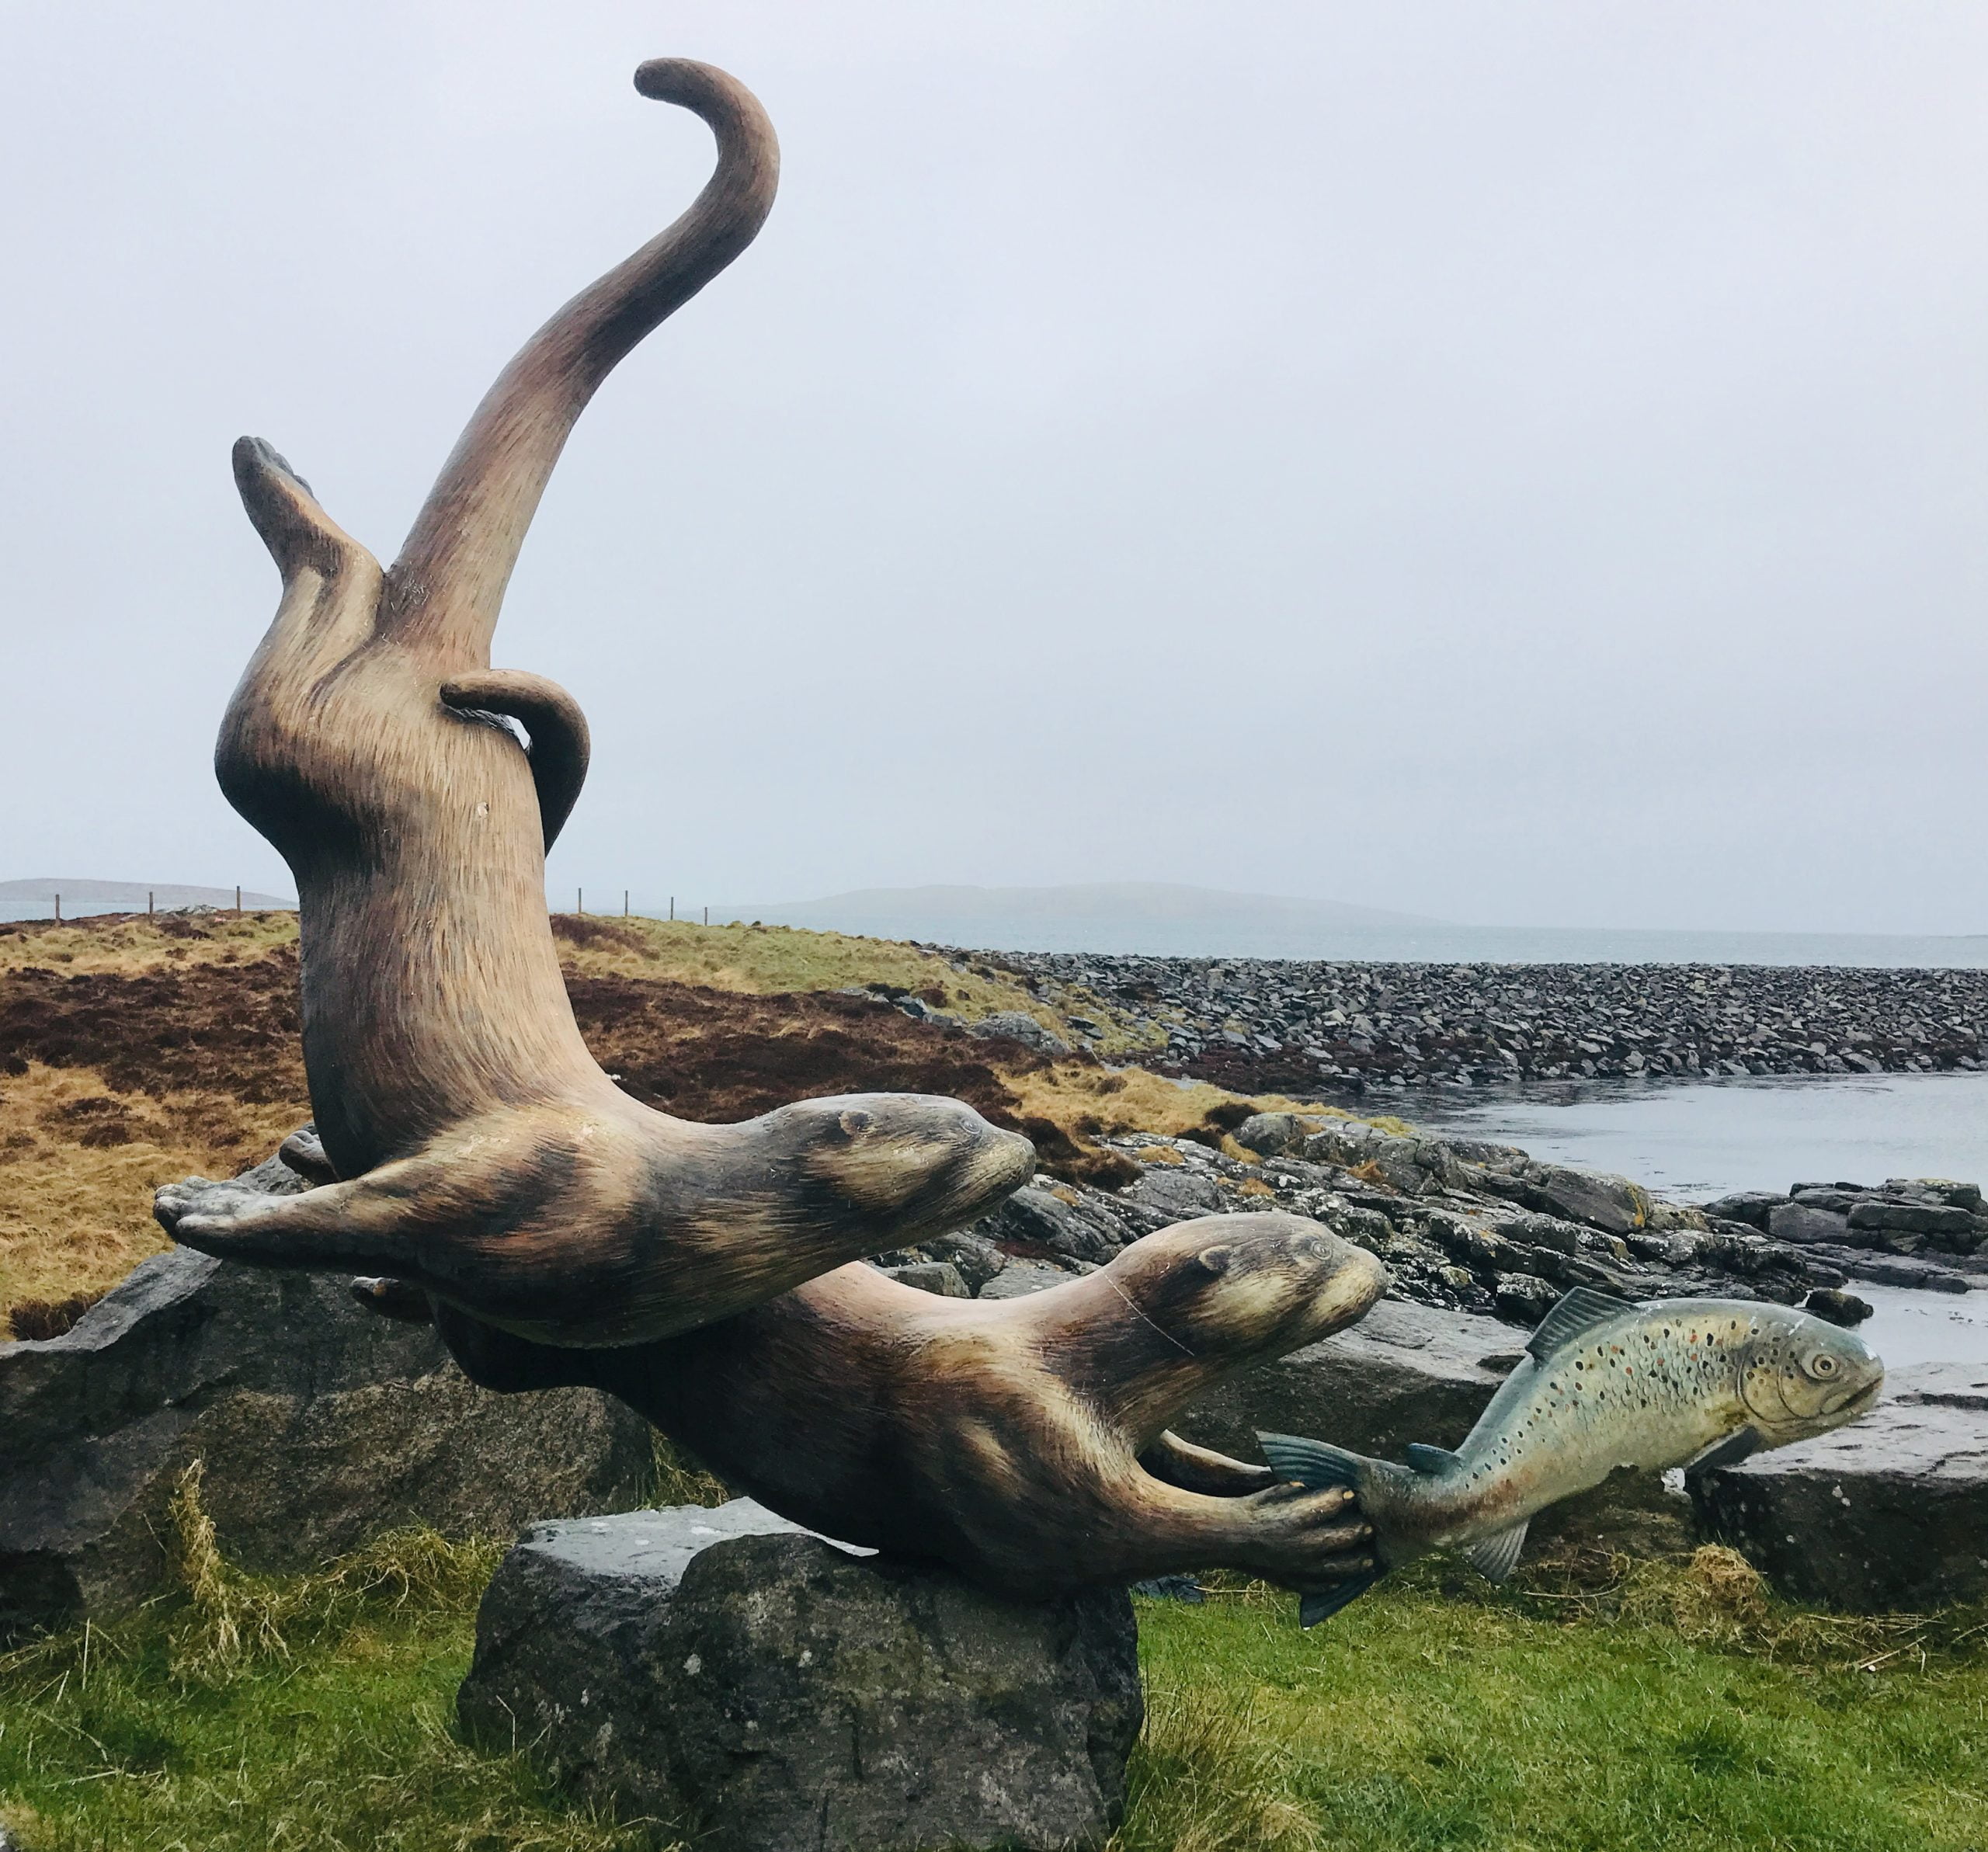 Otter Sculpture at ferry terminal on Barra
The Hebridean Way - Cycling from Barra to the Butt of Lewis